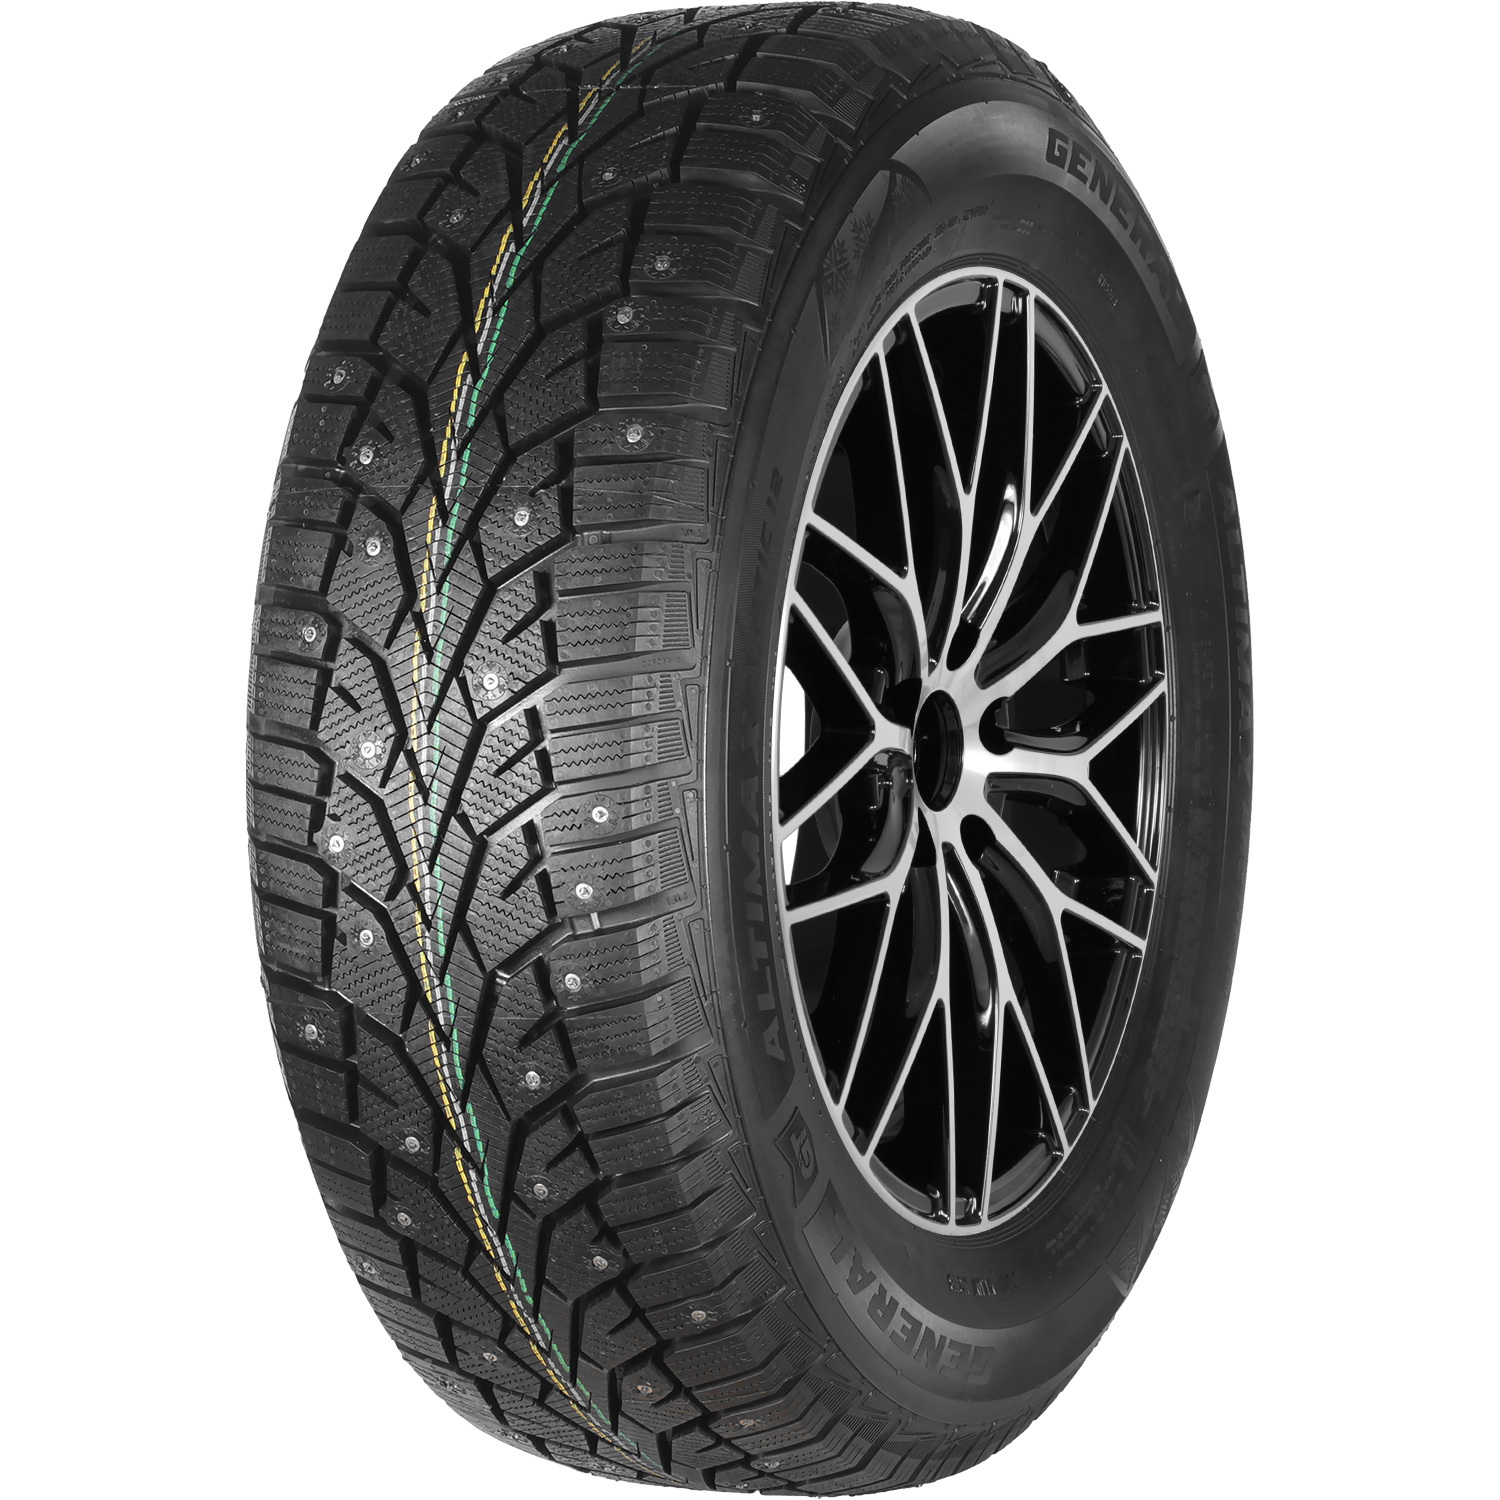 Автомобильная шина General Tire Altimax Arctic 12 175/65 R14 86T Шипованные tire cover central tribal turtle green background spare tire cover